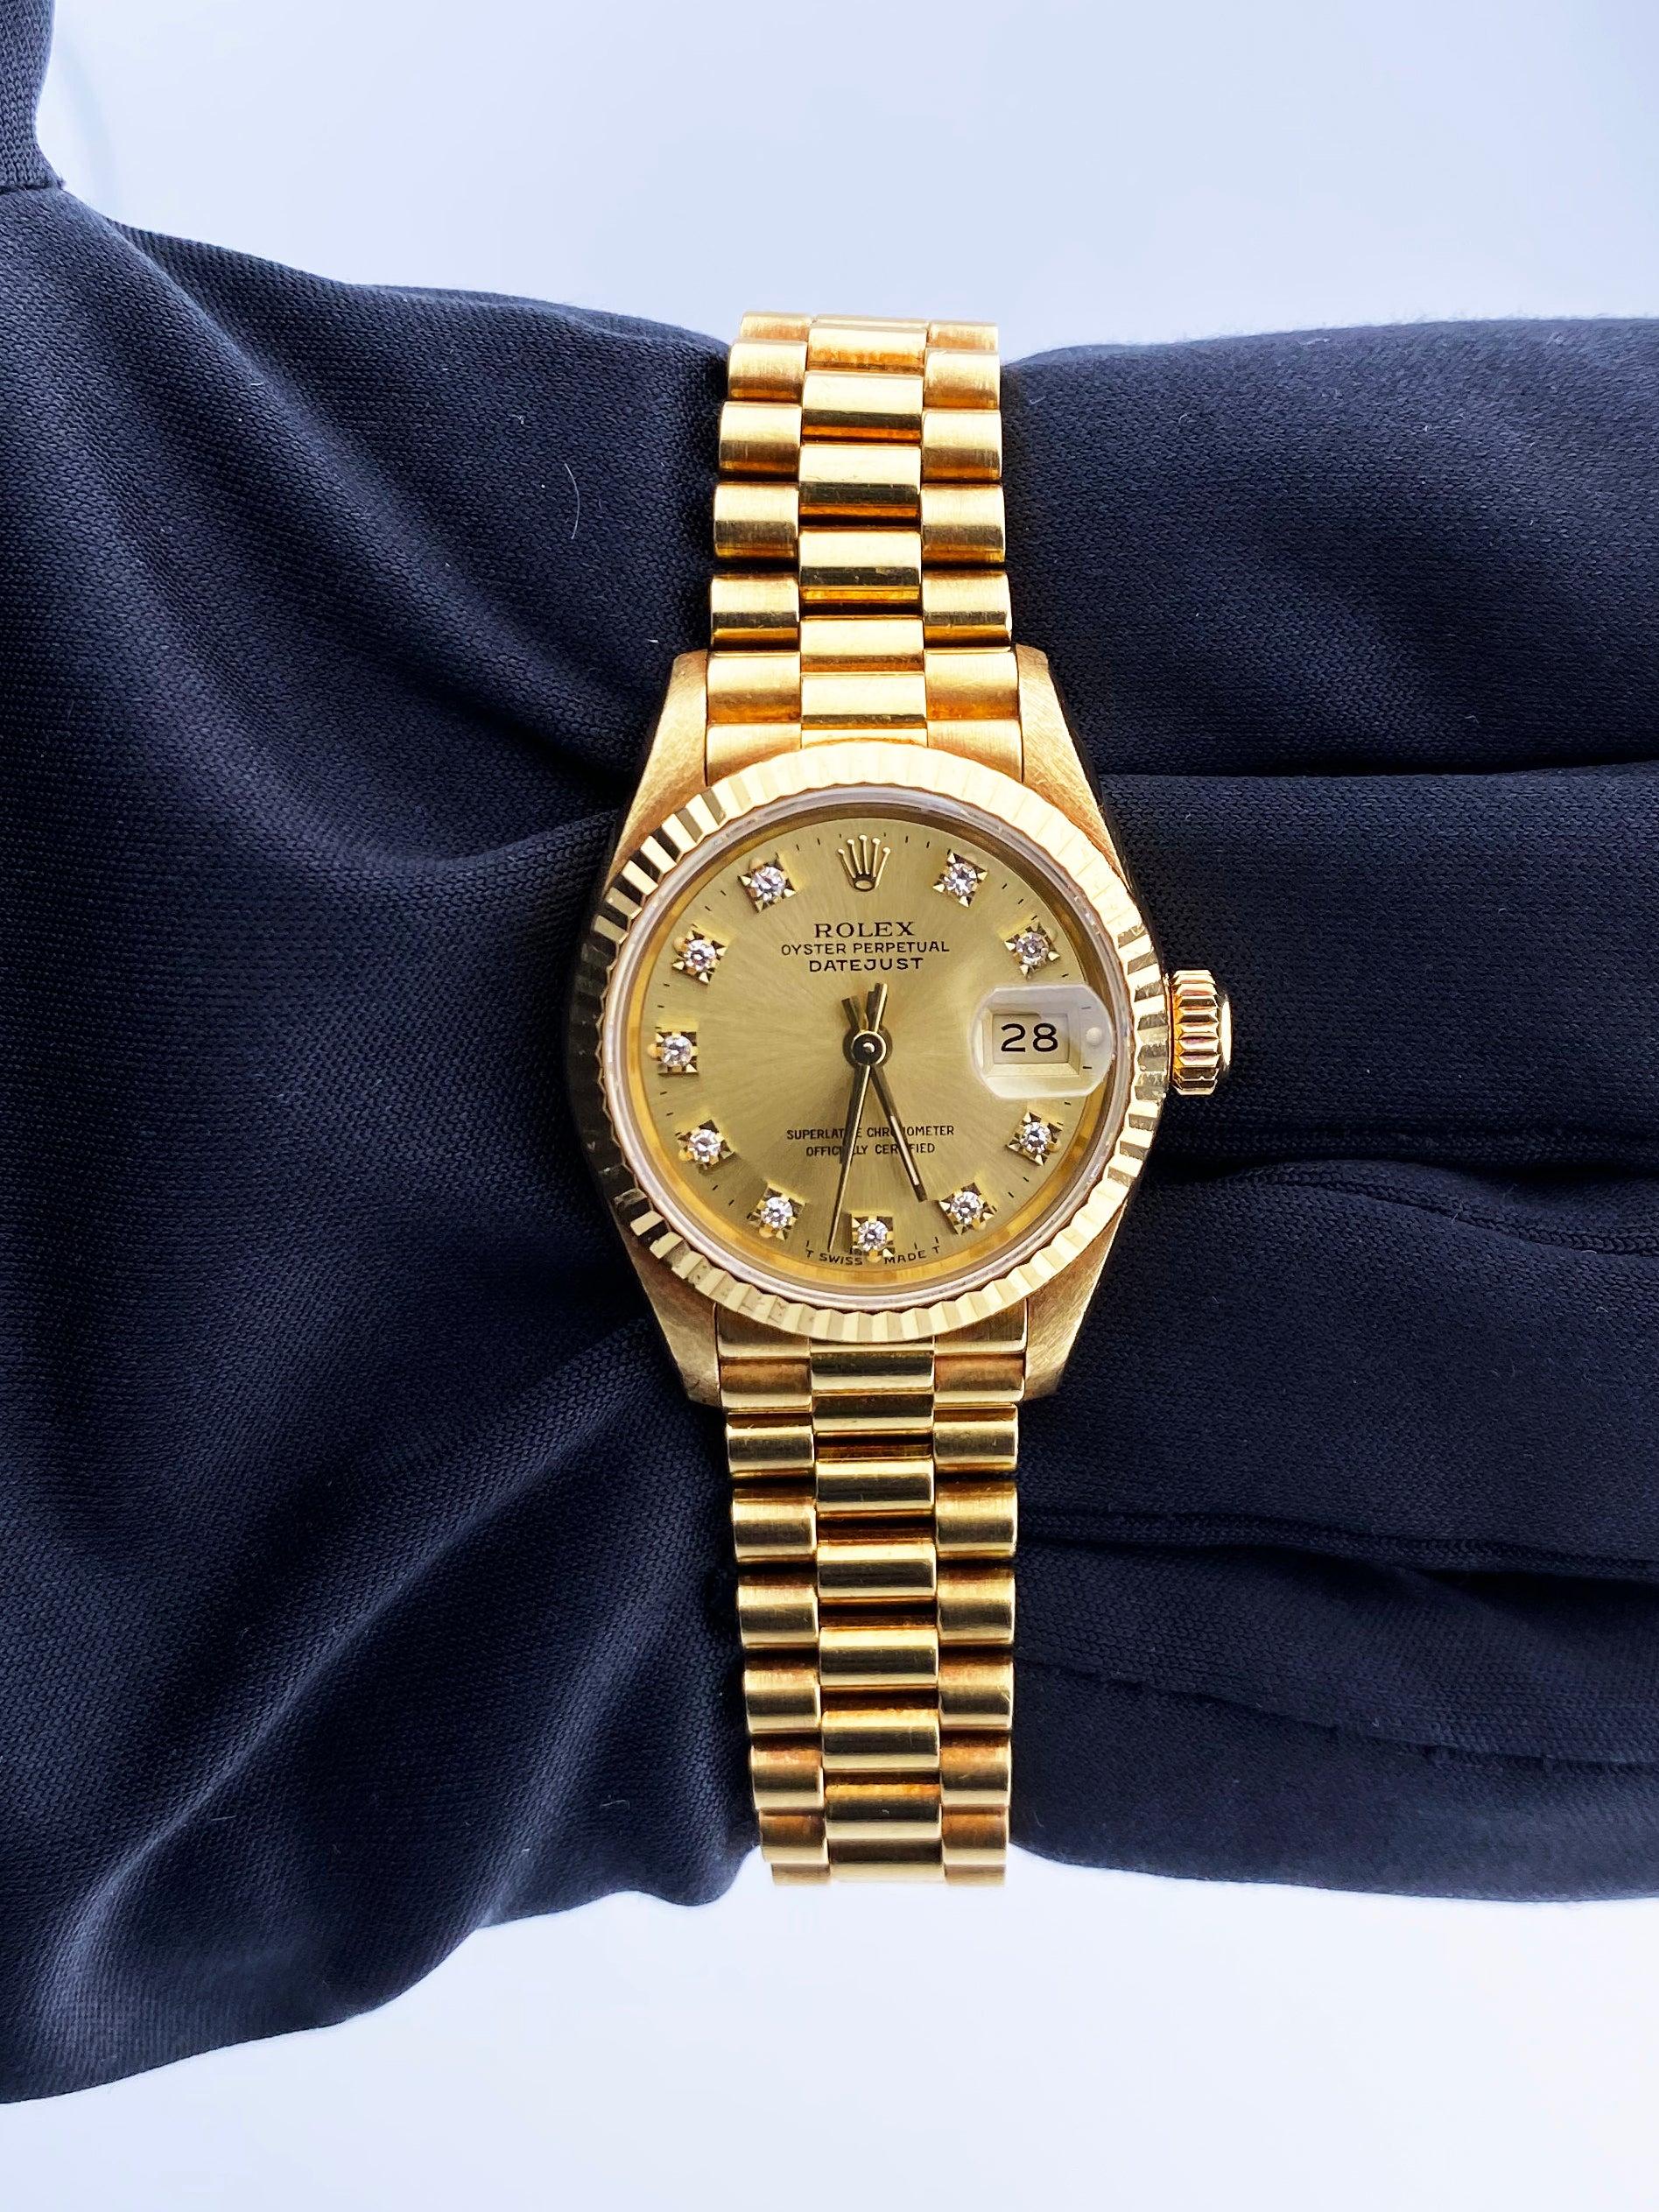 
Rolex Oyster Perpetual Datejust 69178 Ladies Watch. 26mm 18K yellow gold case with a fluted bezel. Champagne dial with gold hands and original factory diamond set hour markers. Minute markers on the outer dial. Date display at the 3 o'clock